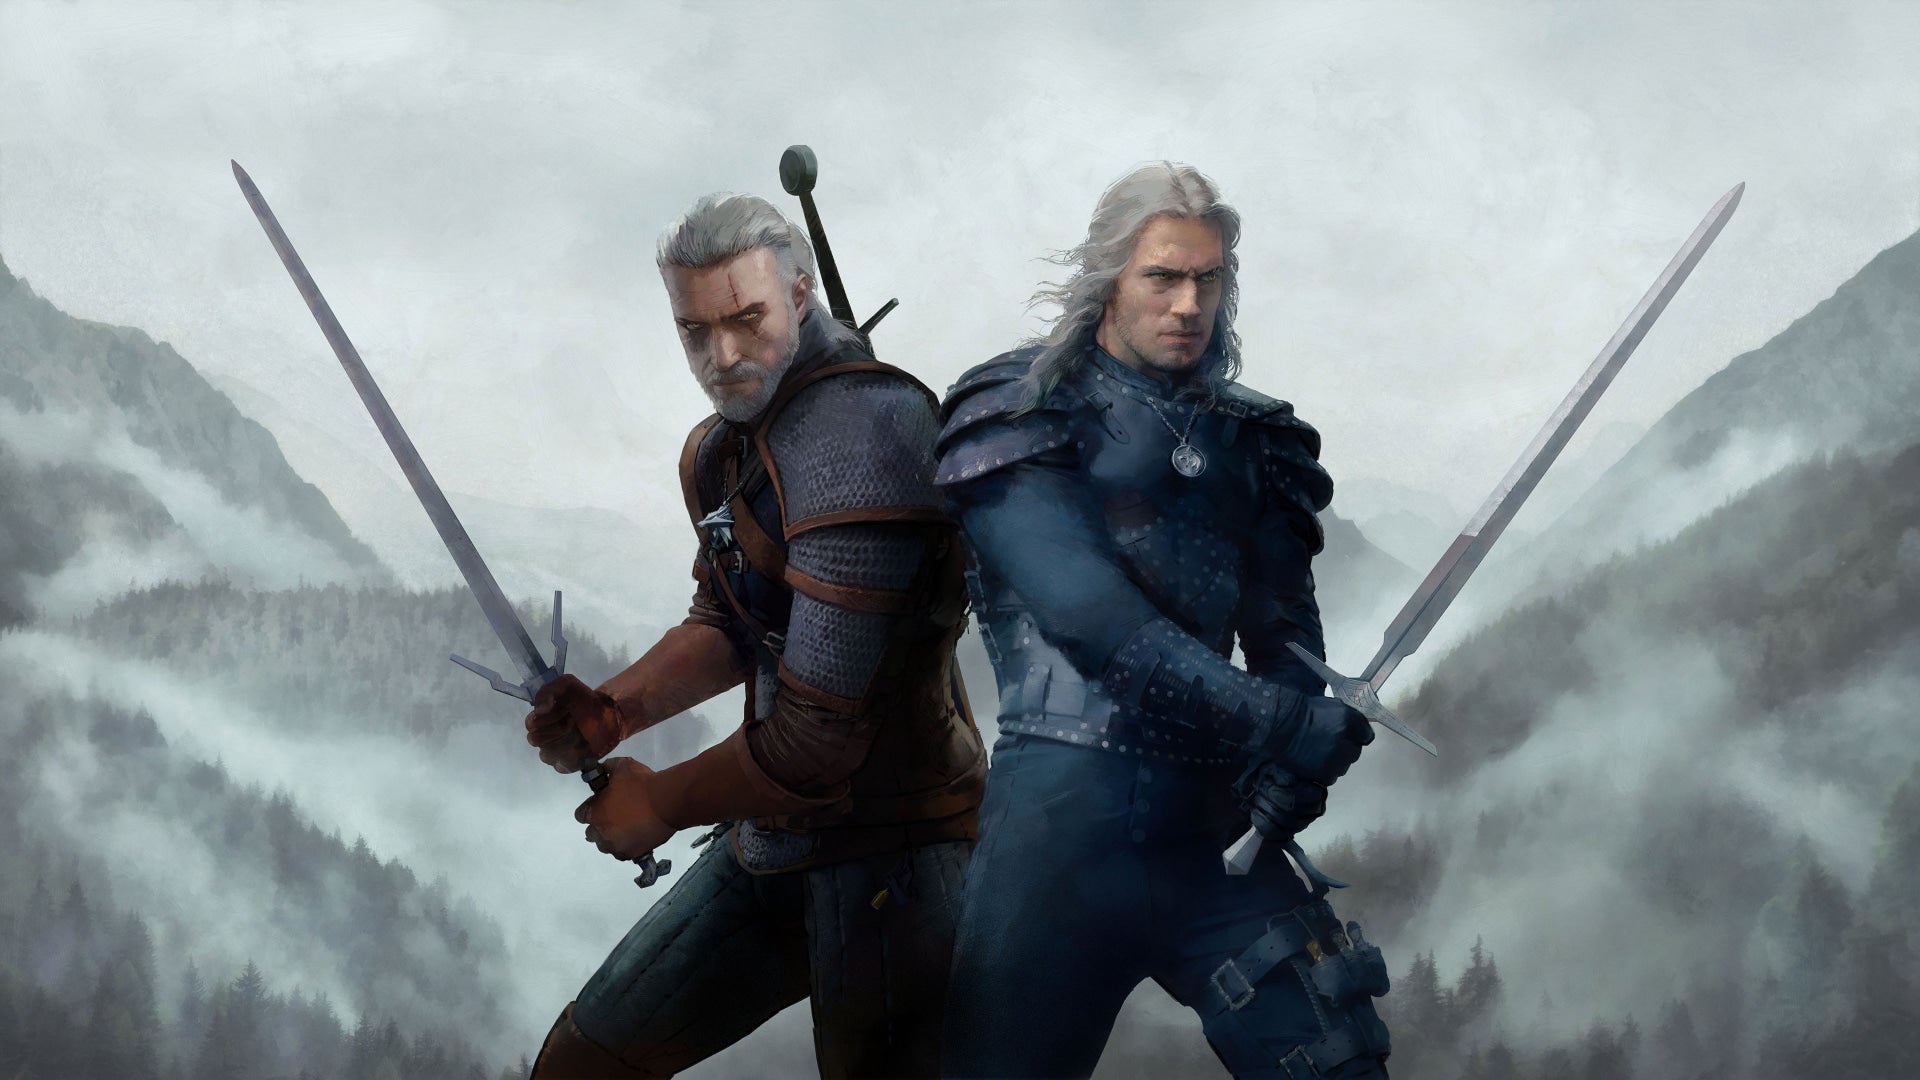 Image for WitcherCon promises announcements from Netflix and CD Projekt Red – but don't expect any new games